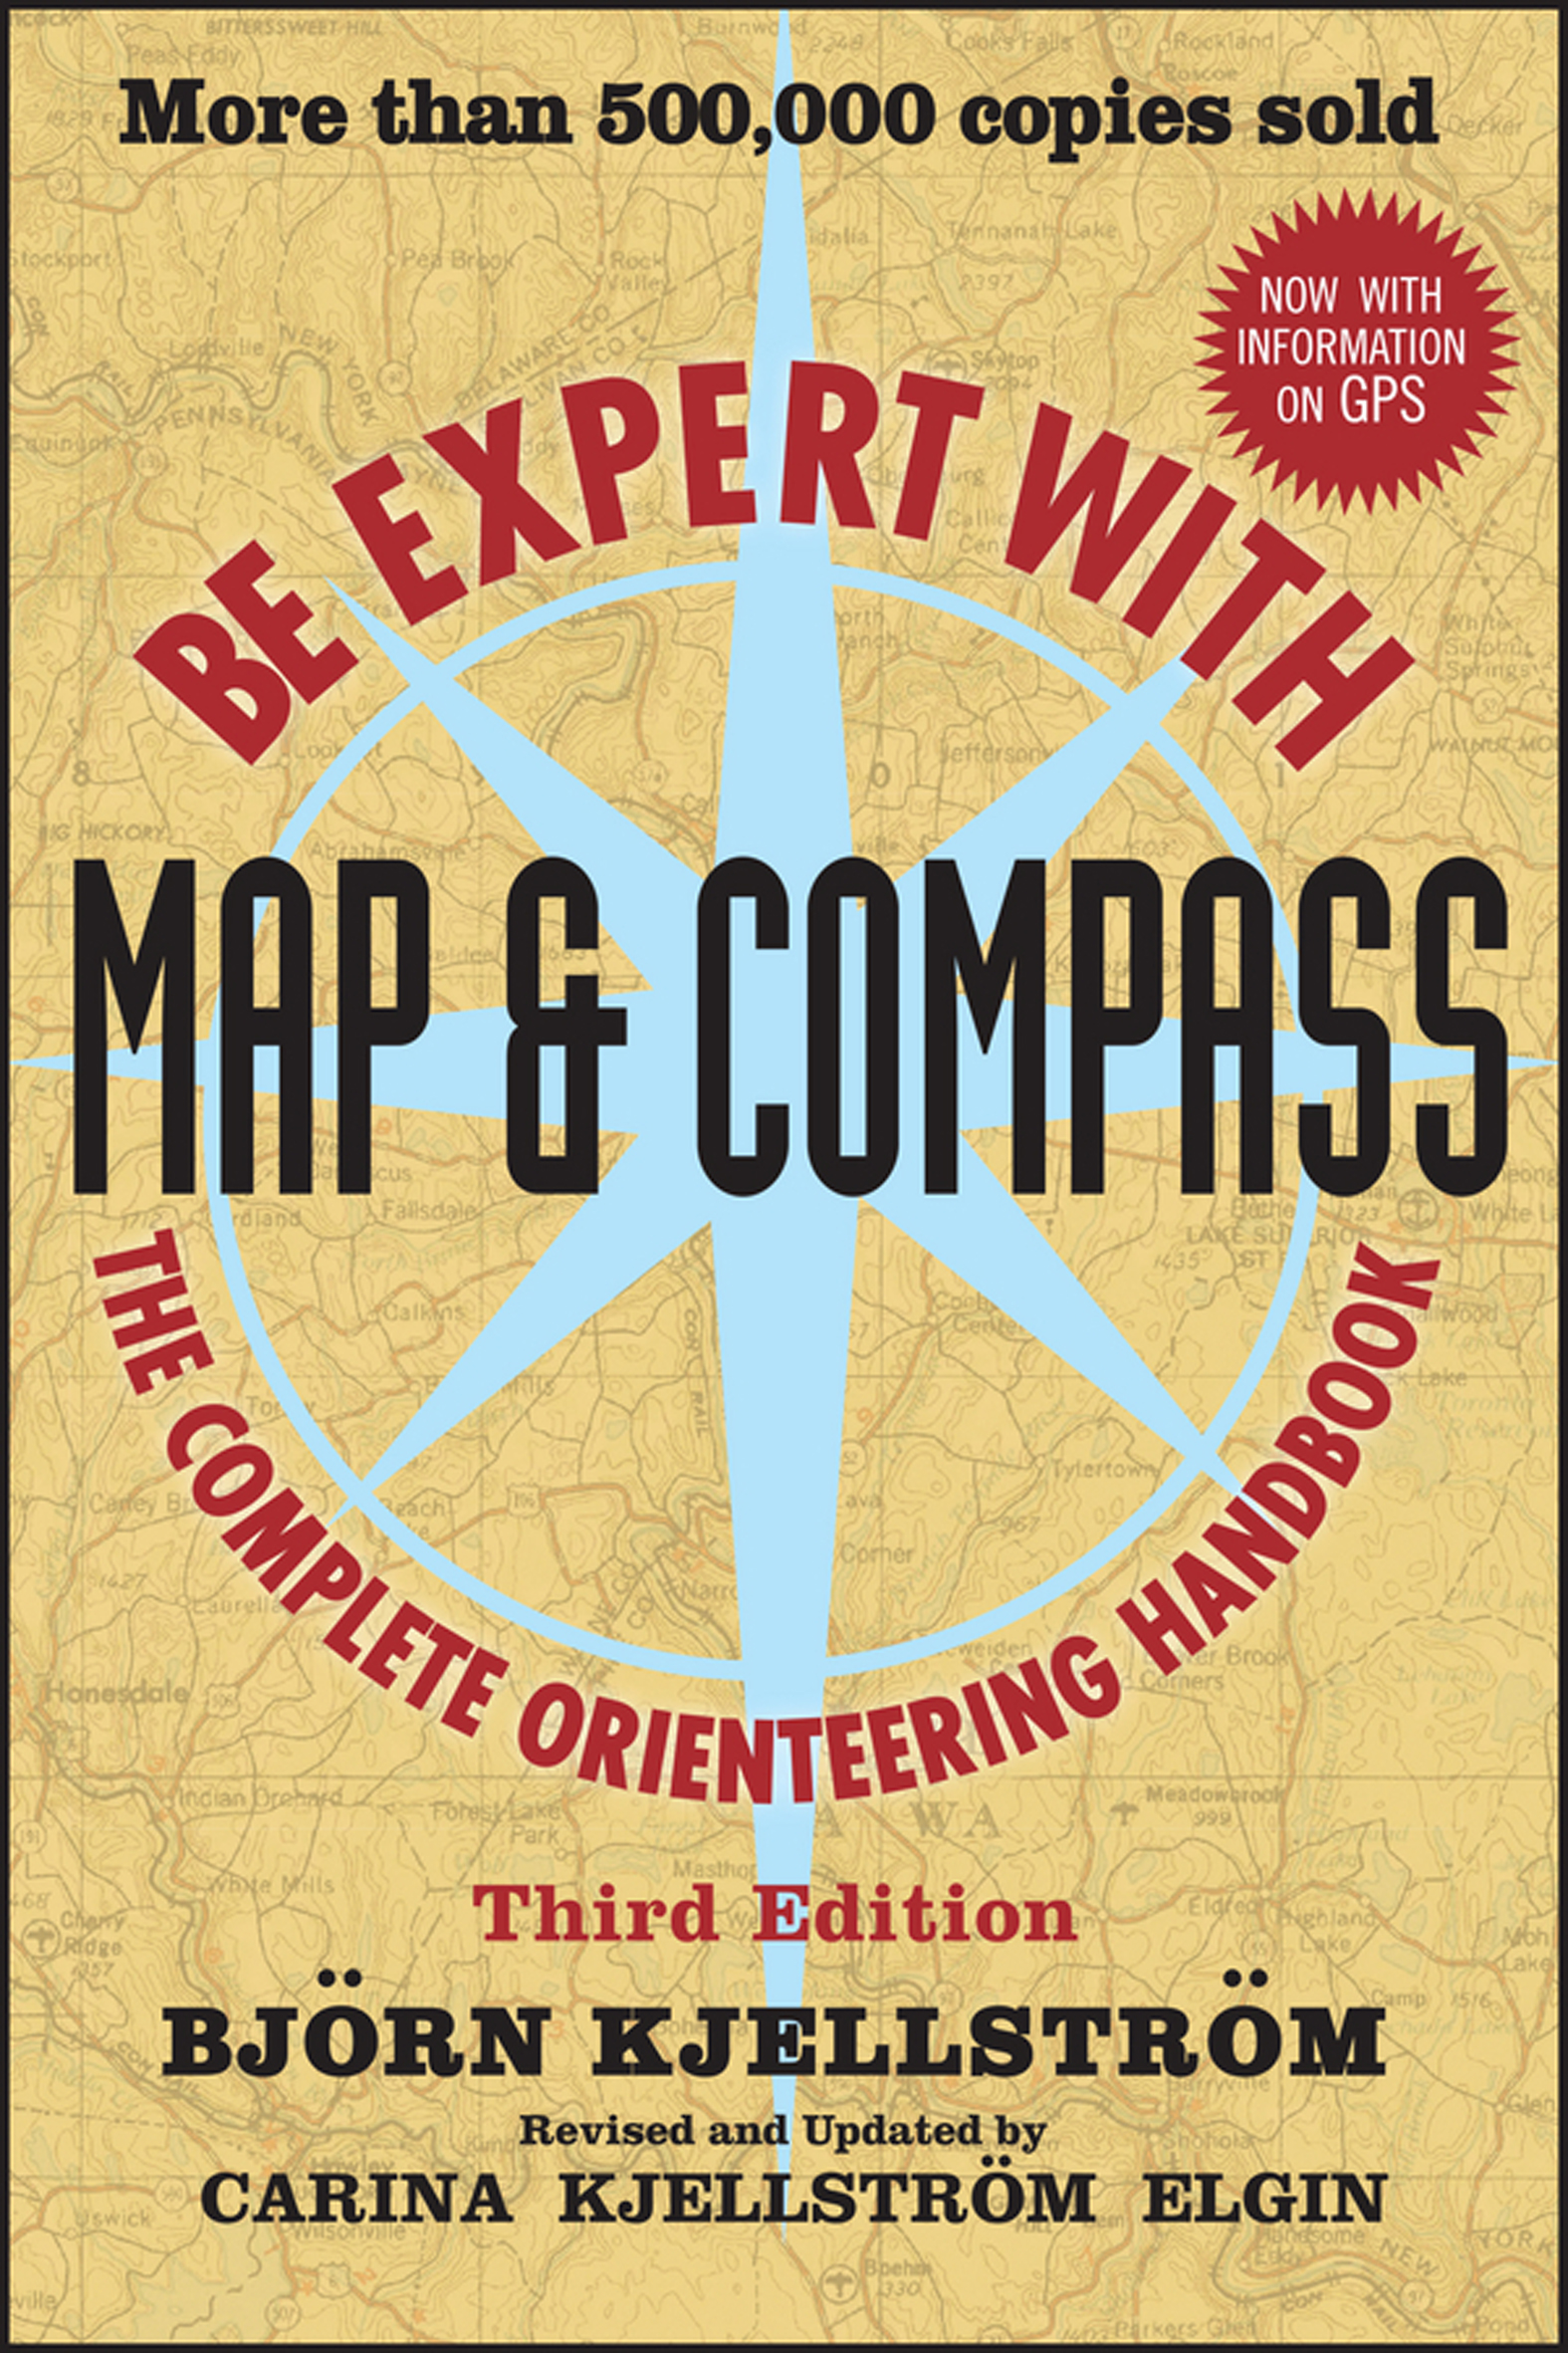 Be Expert with Map and Compass cover image